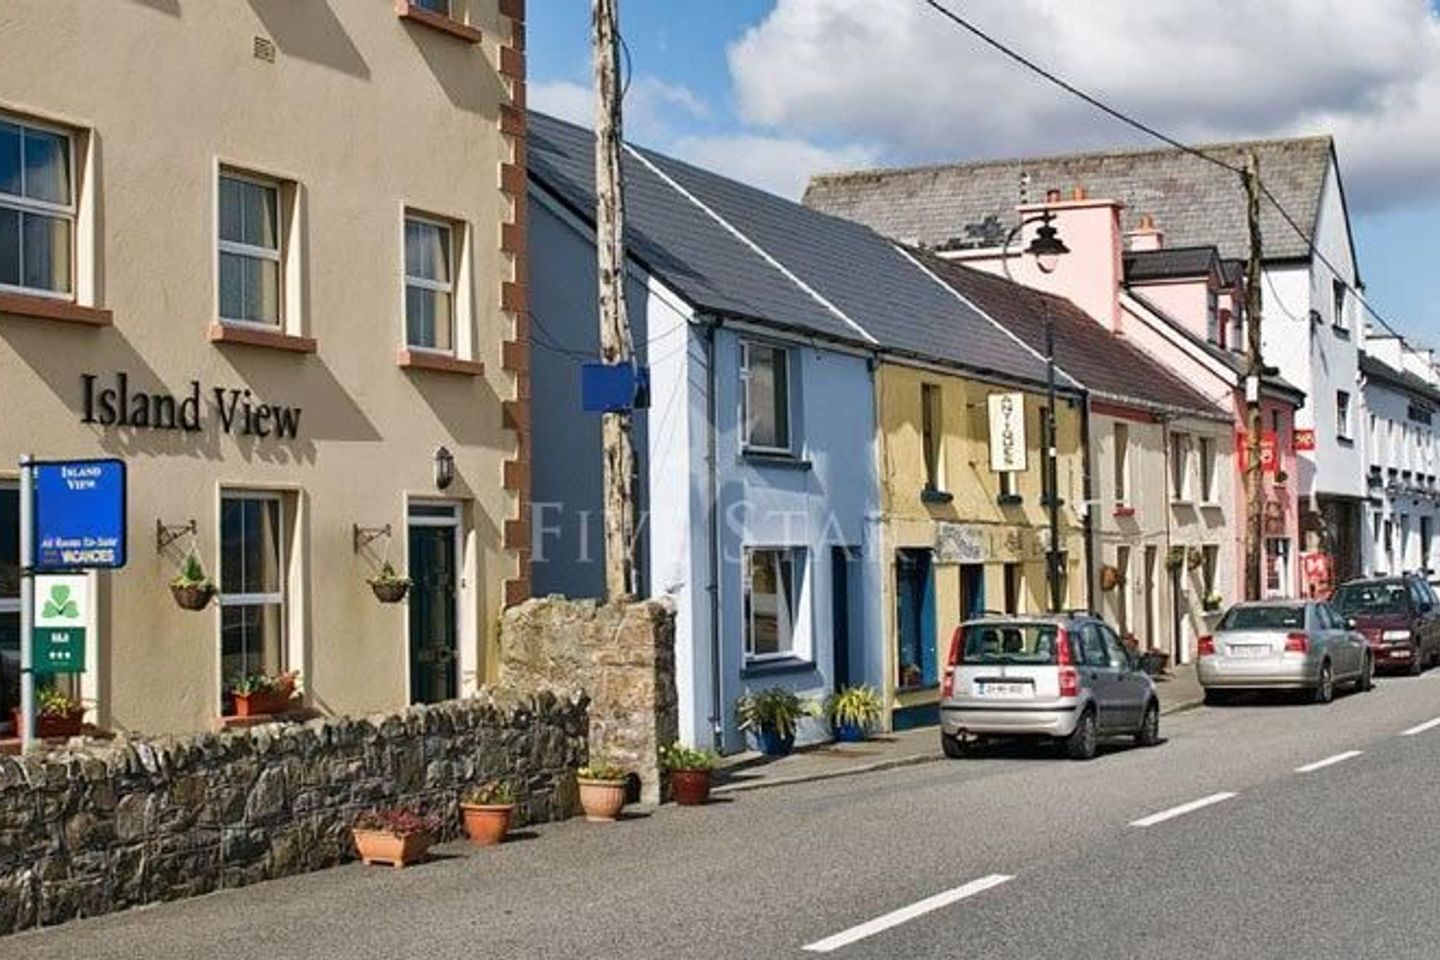 Main St, Roundstone, Co. Galway